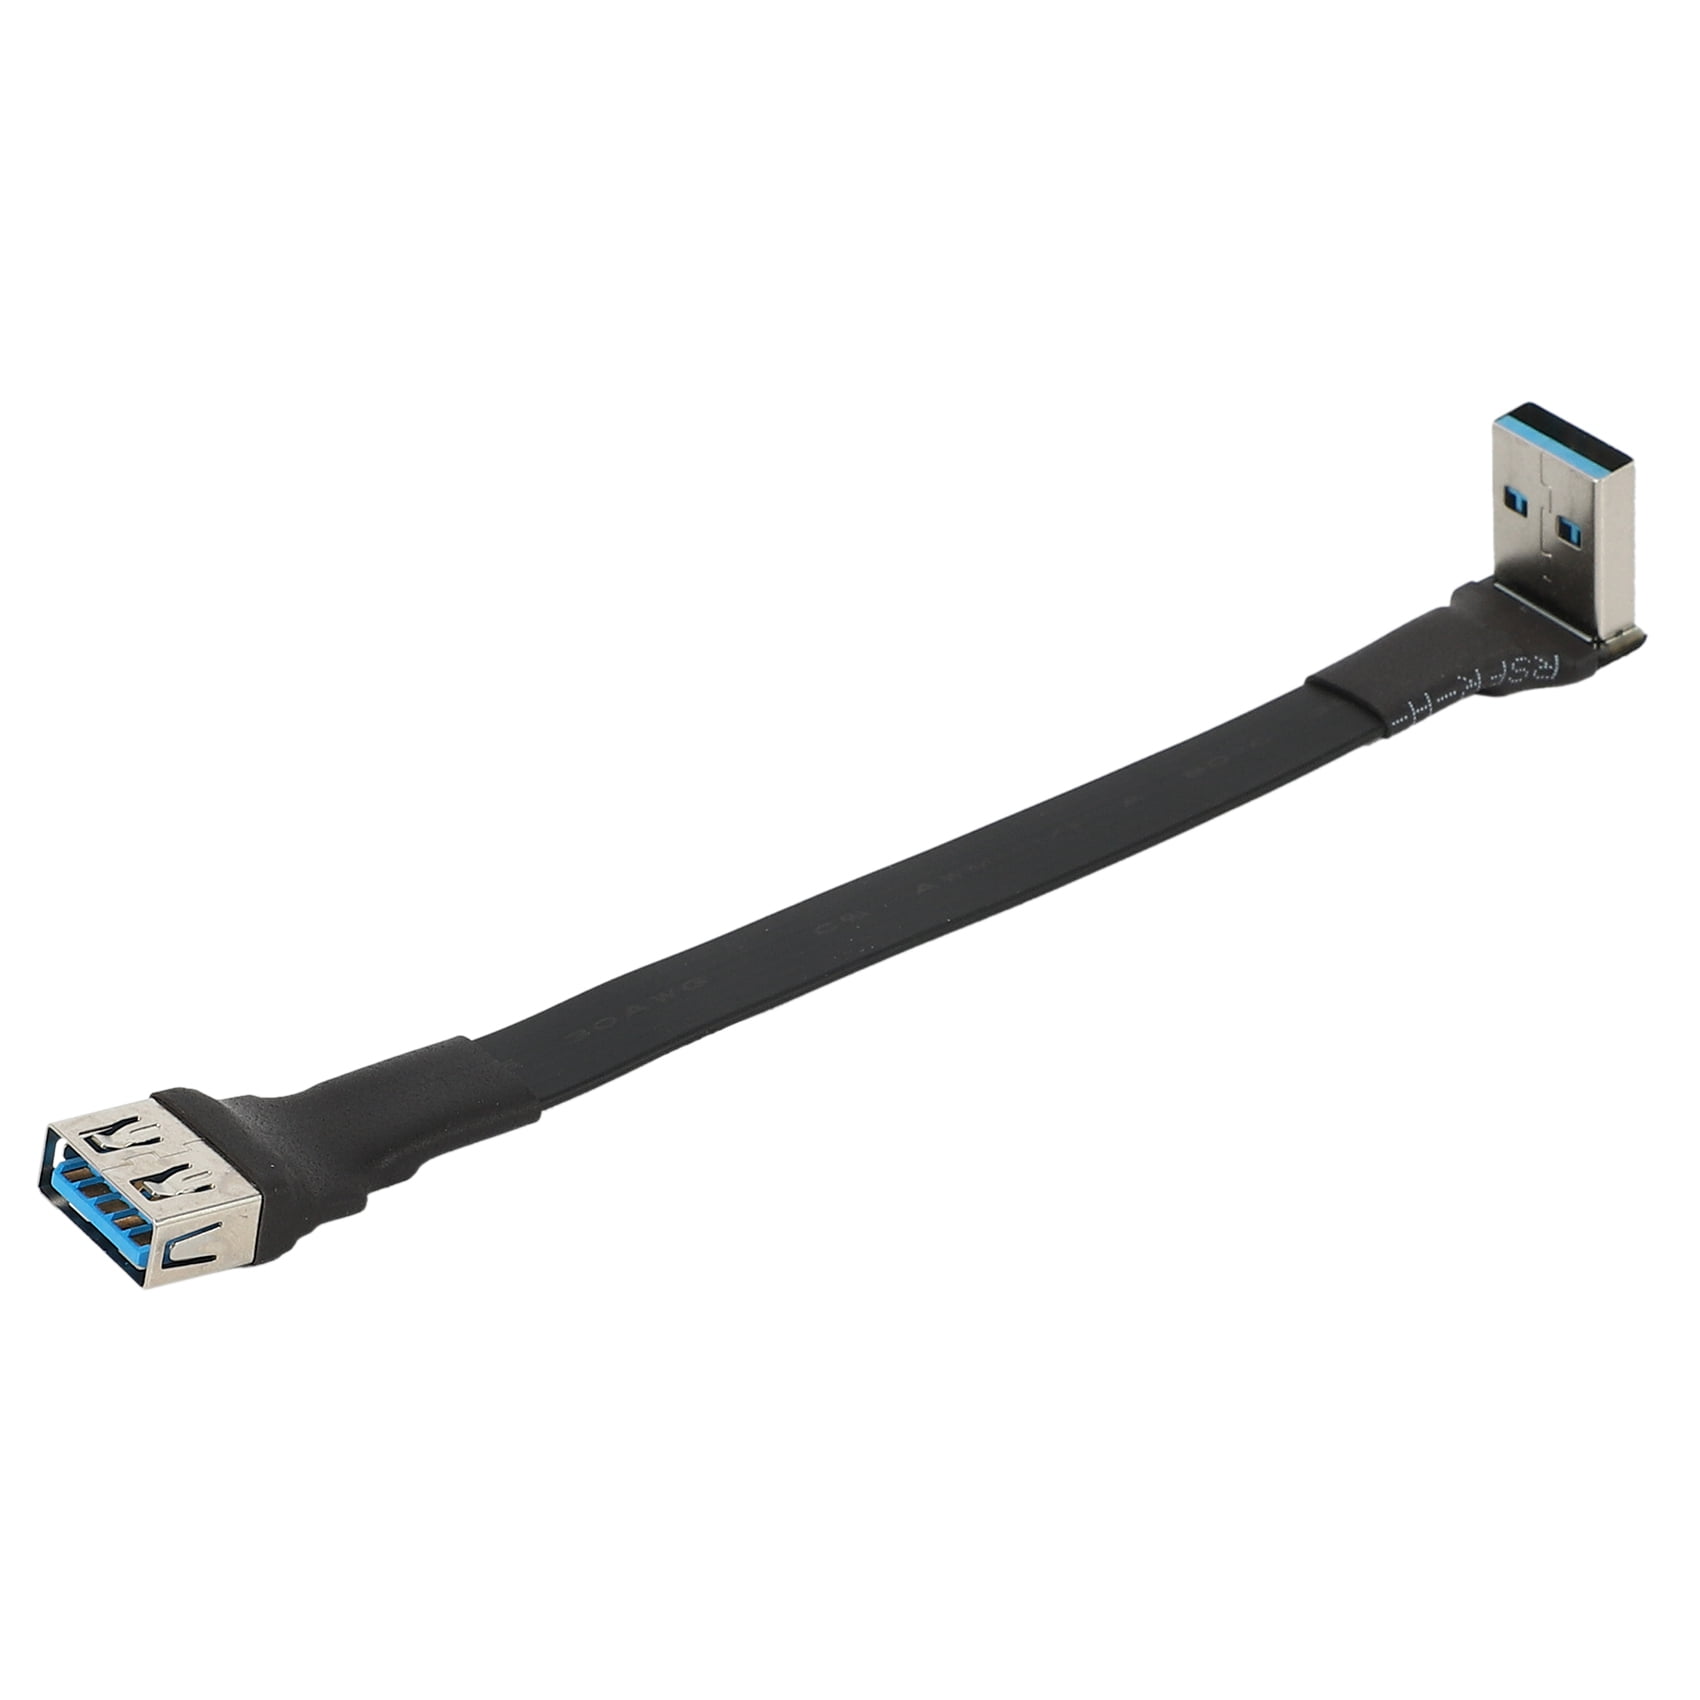 USB 3.0 Cable USB Extension Cable Male to Data Cable Right 90 Degree USB3.0 Extender Cord 10cm - Walmart.com